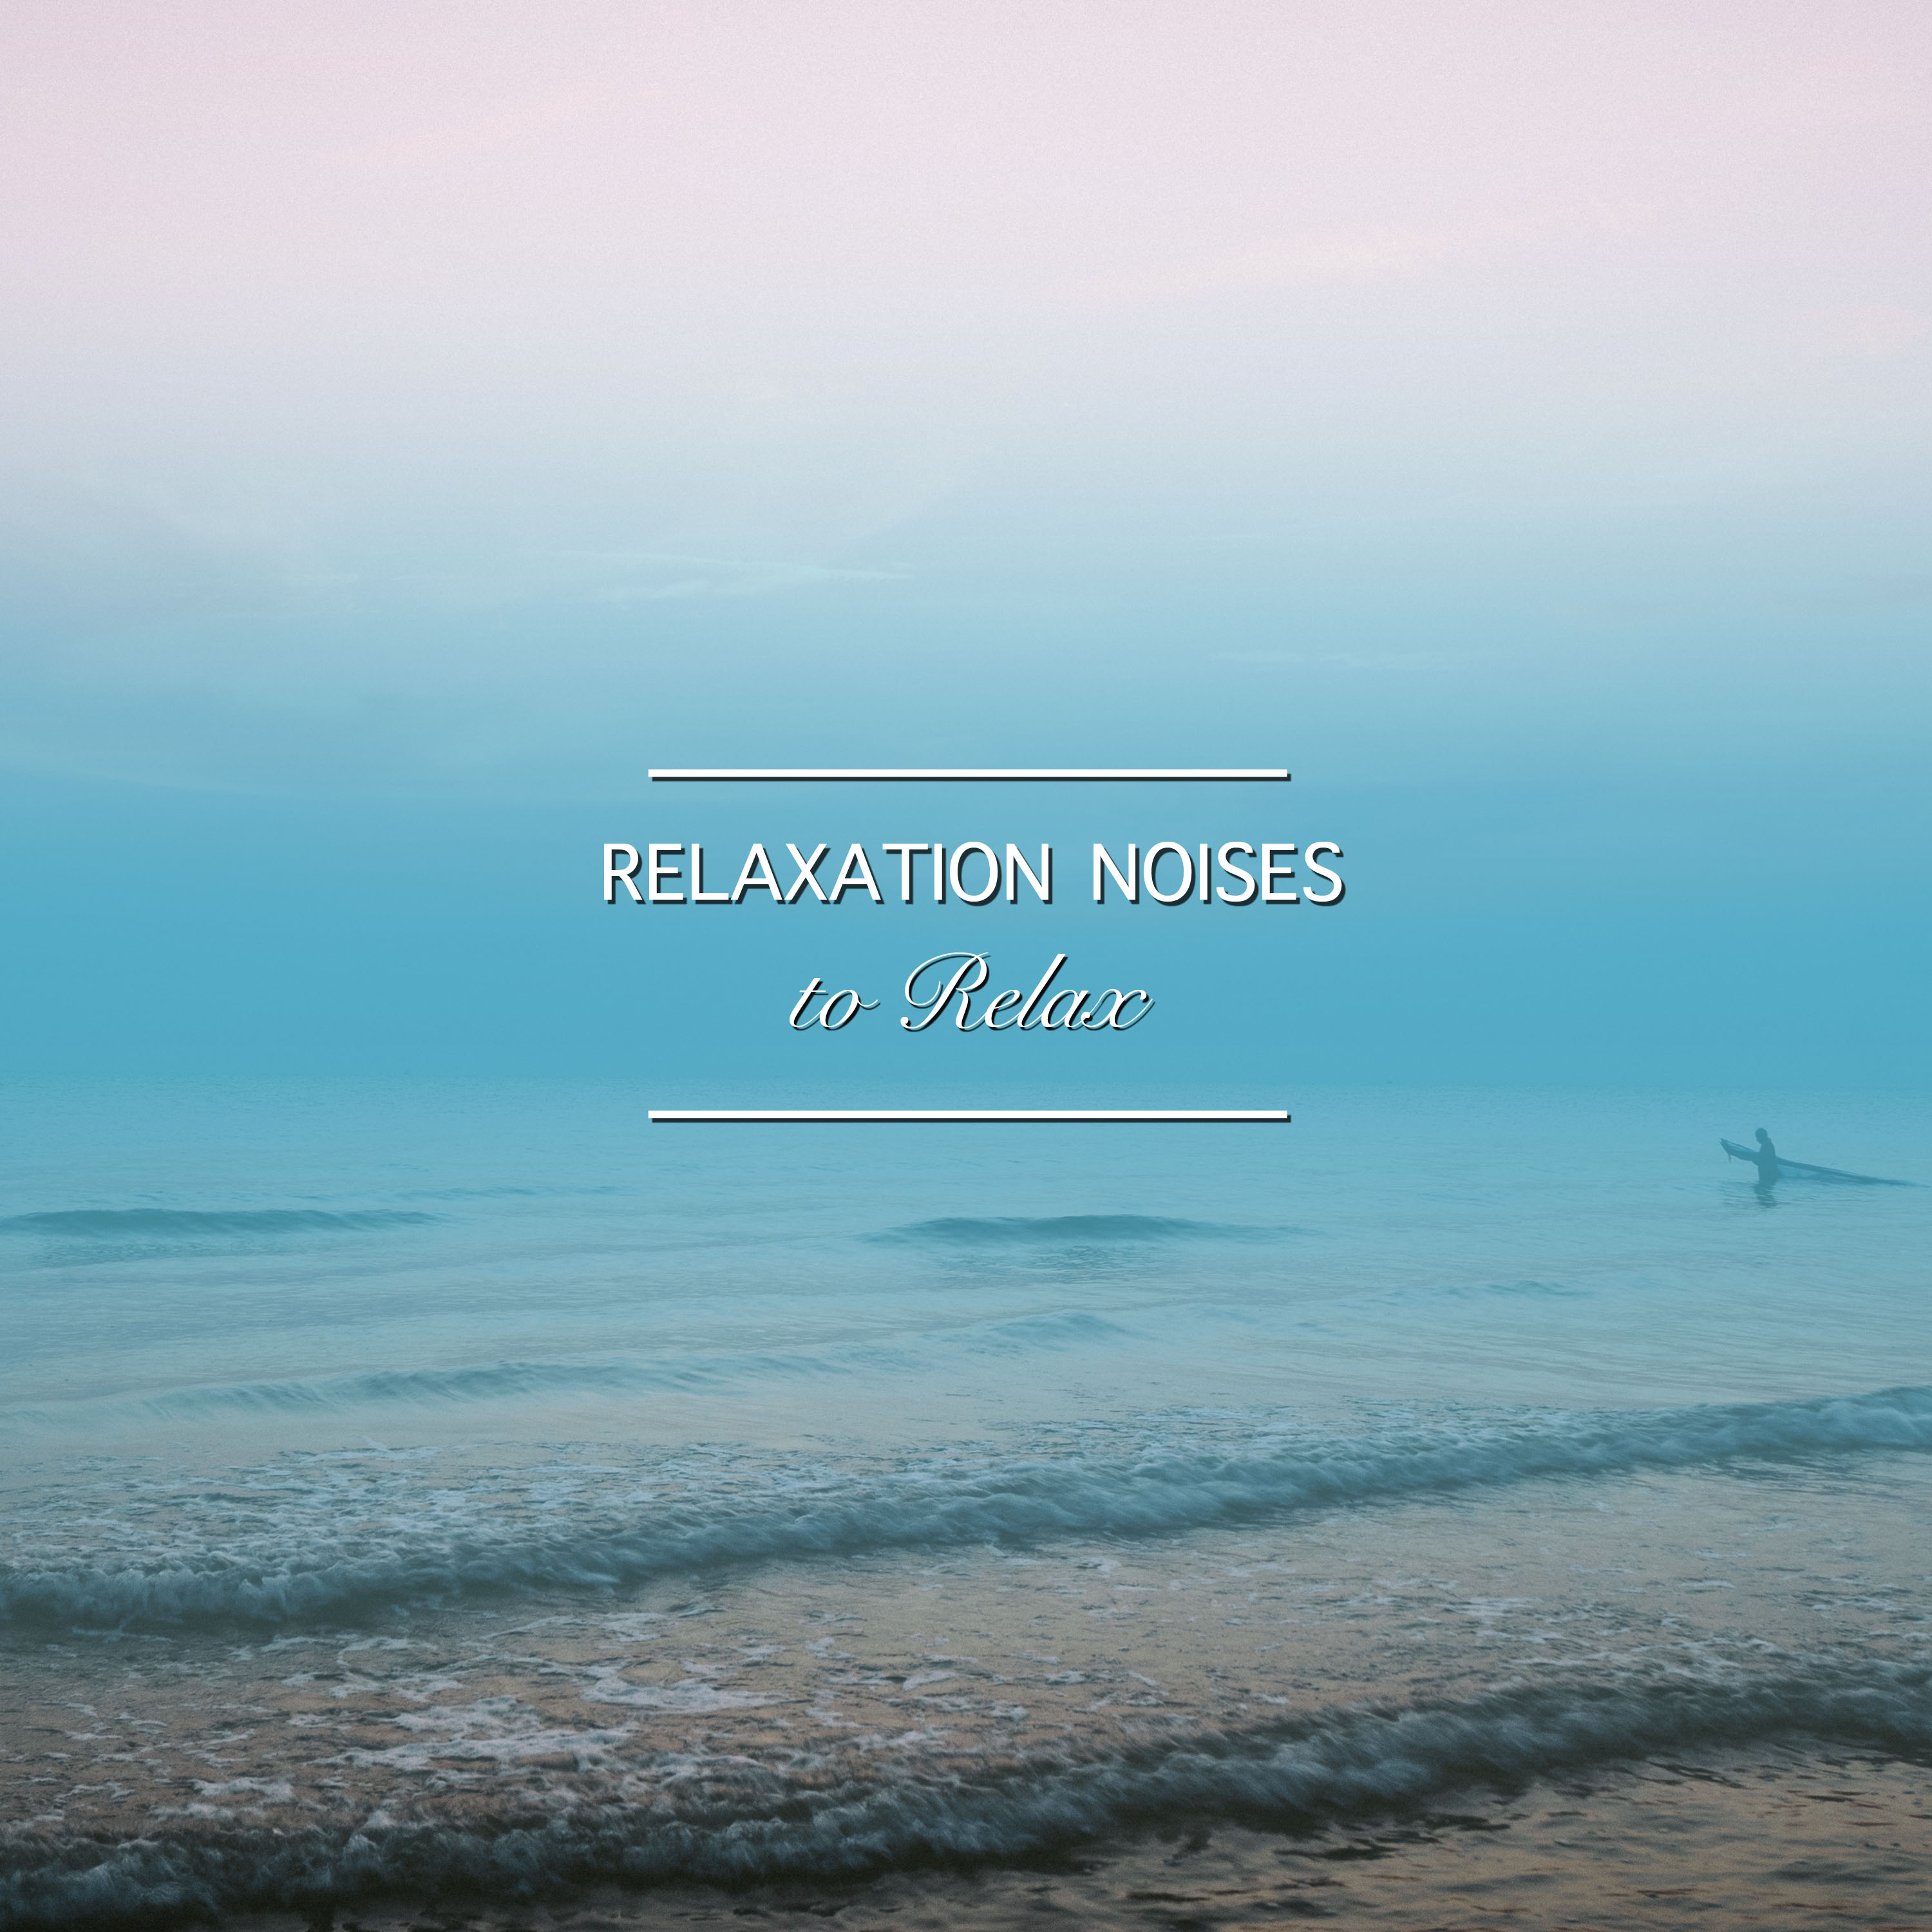 19 Relaxation Noises to Relax